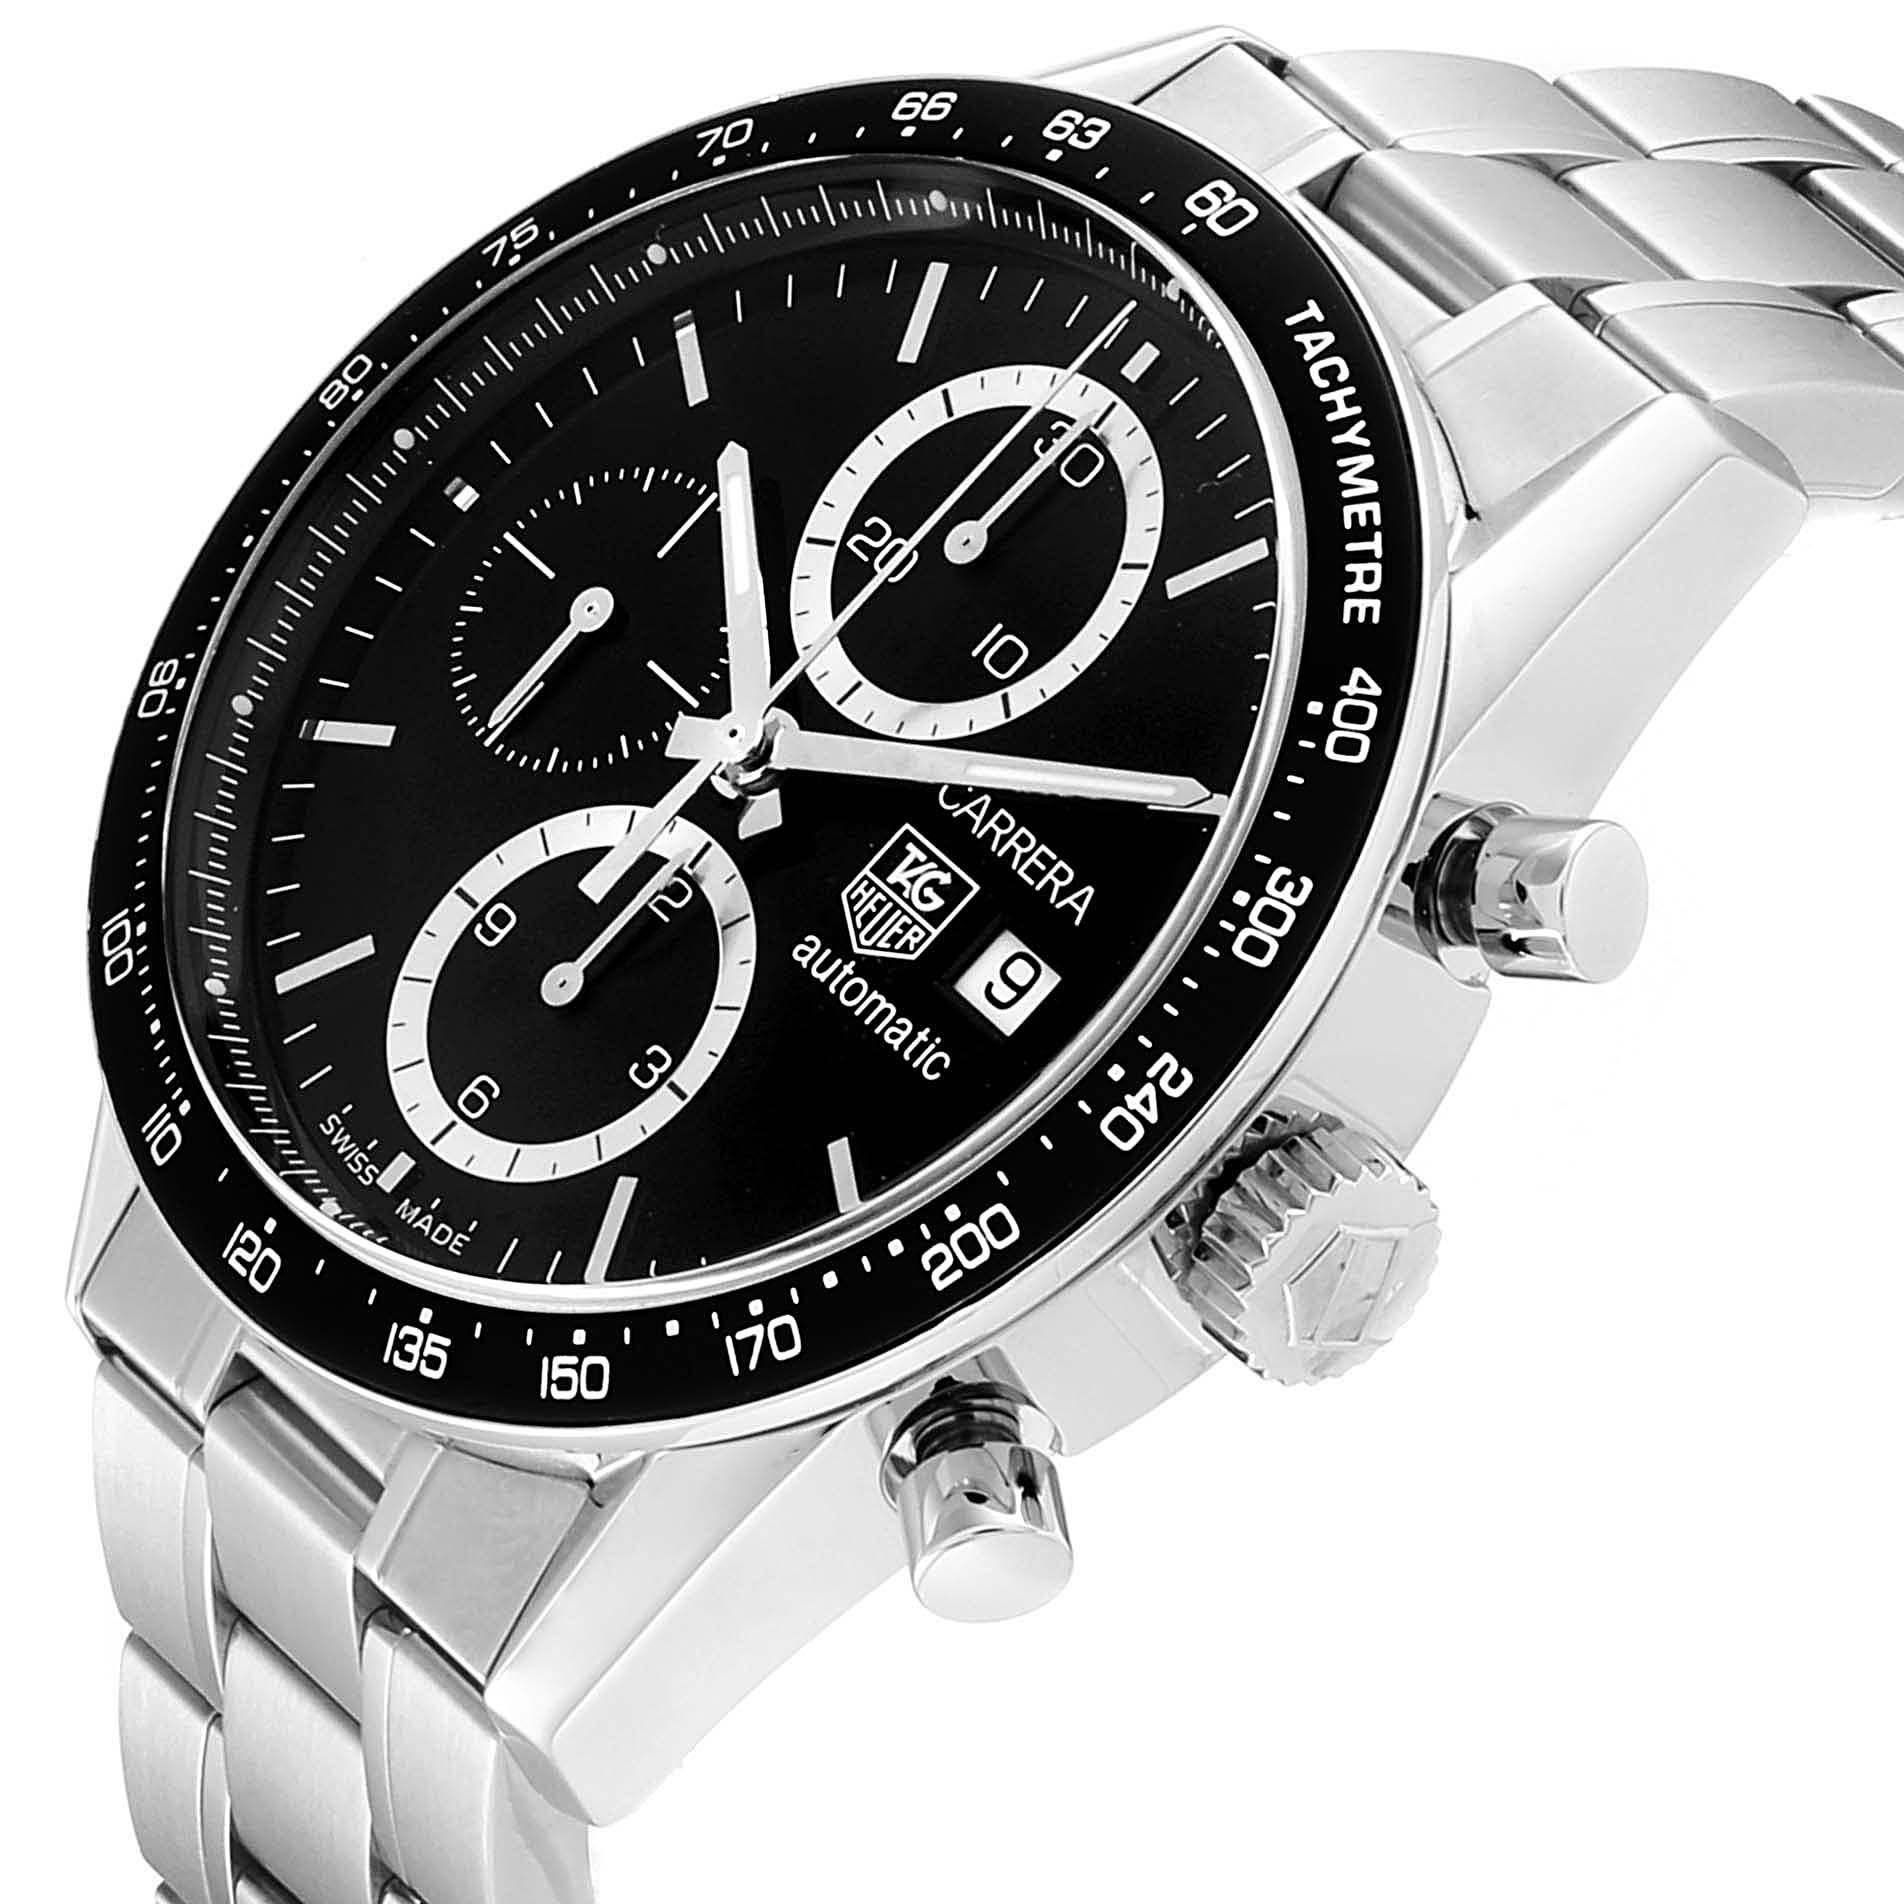 TAG Heuer Carrera Tachymeter Chronograph Men's Watch CV2010 Box Card In Excellent Condition For Sale In Atlanta, GA